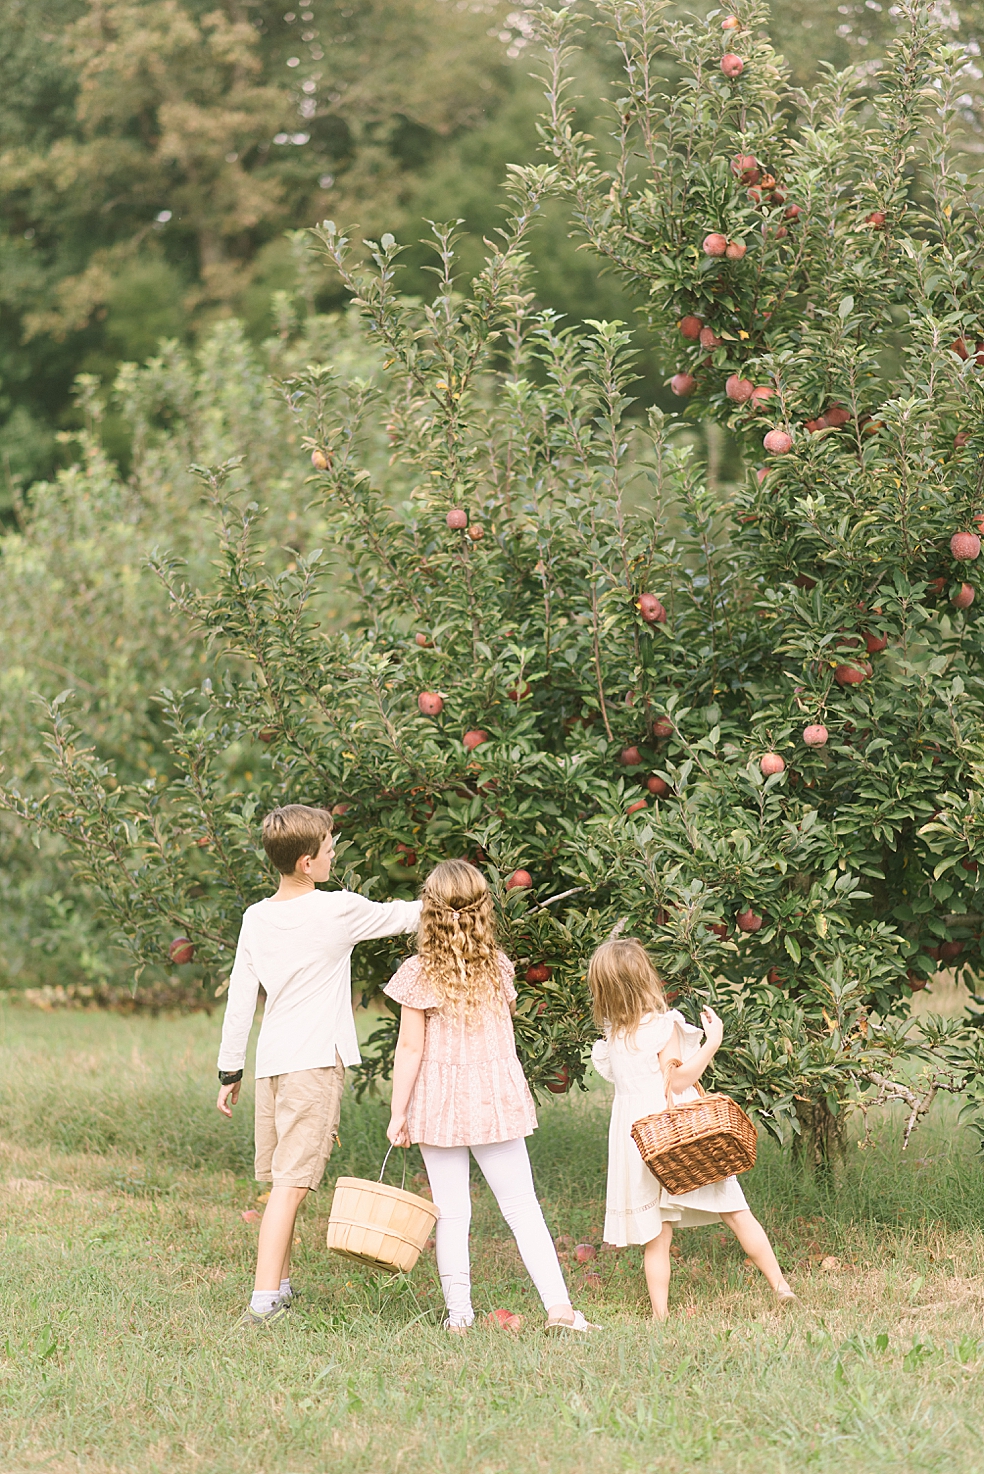 Family picking apples together at Scotts Orchard | Photo by Jessica Lee Photography